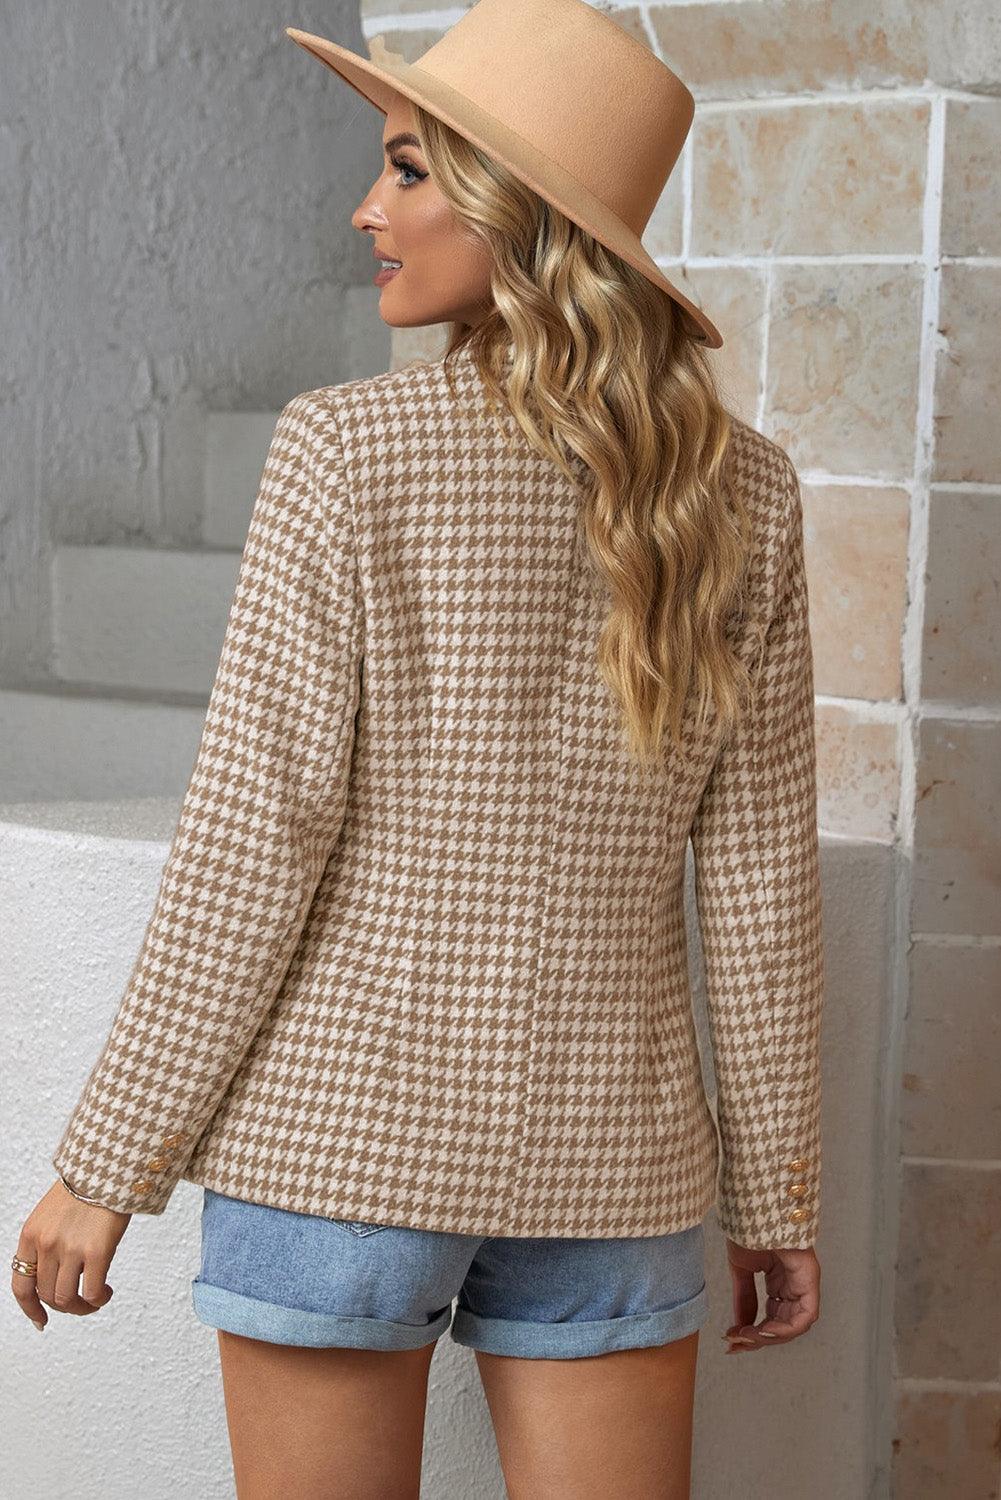 Get the Classic Look with Houndstooth Double-Breasted Blazer for Women